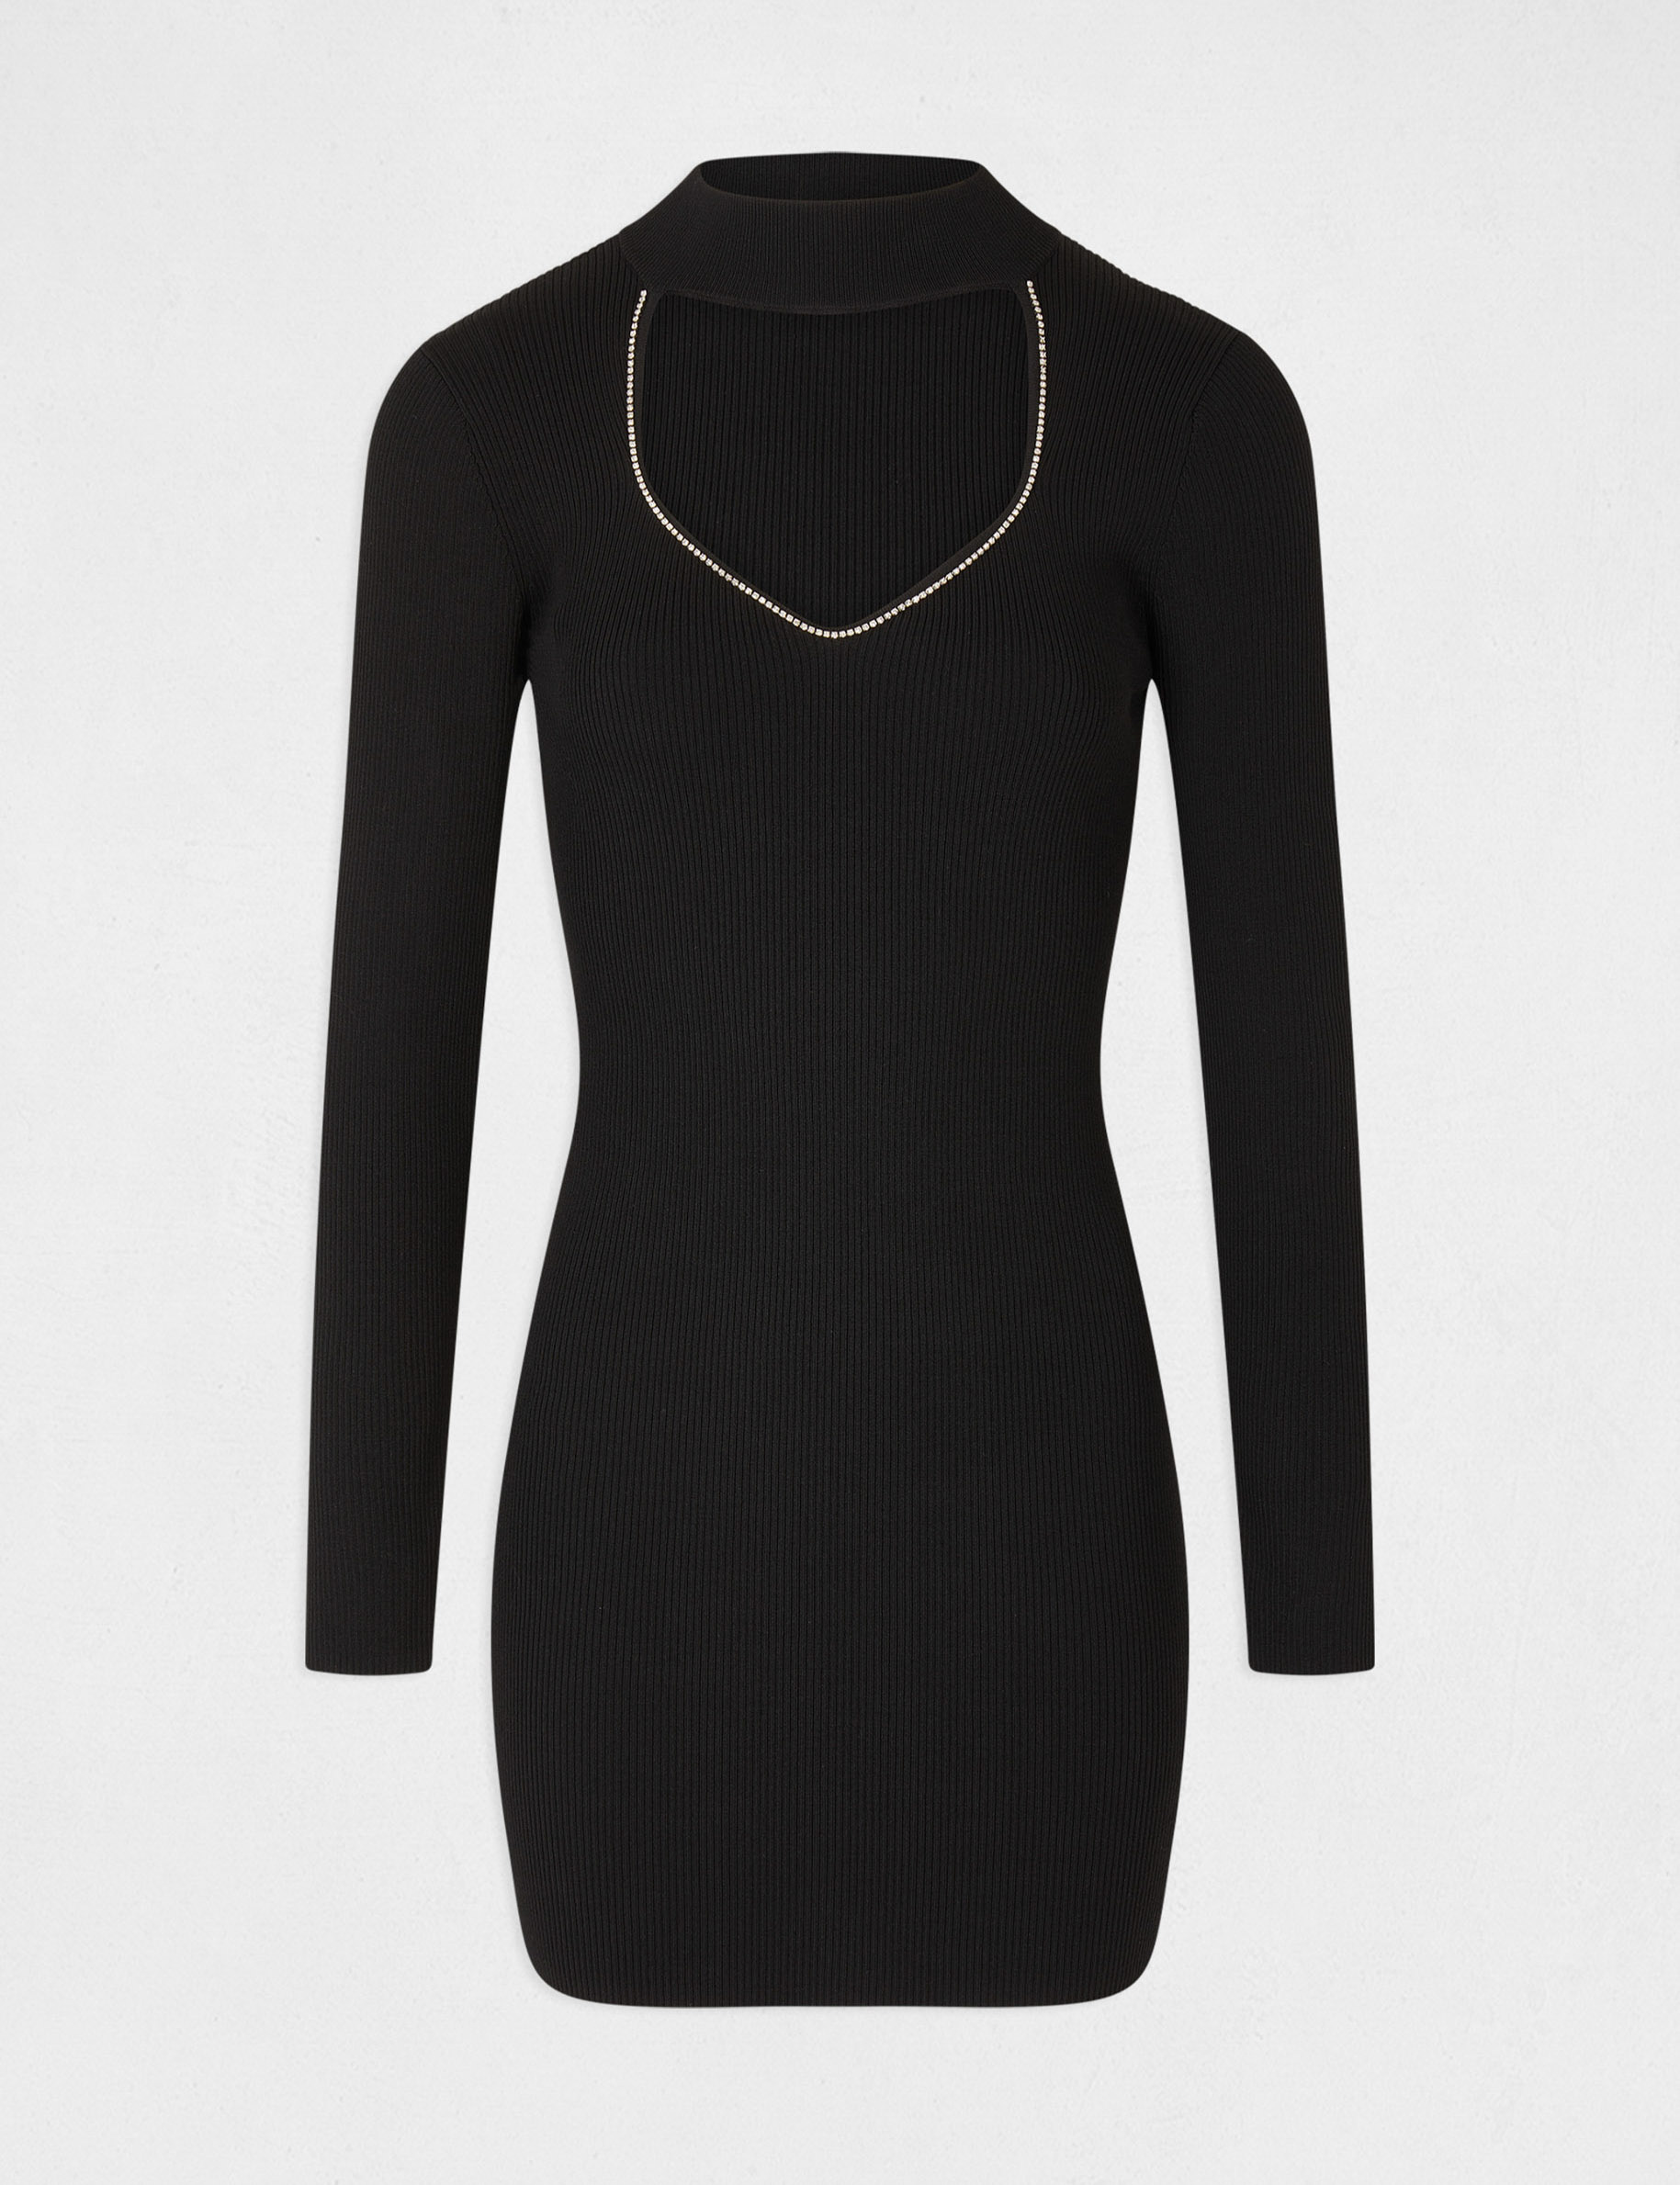 Fitted jumper dress with opening black ladies'